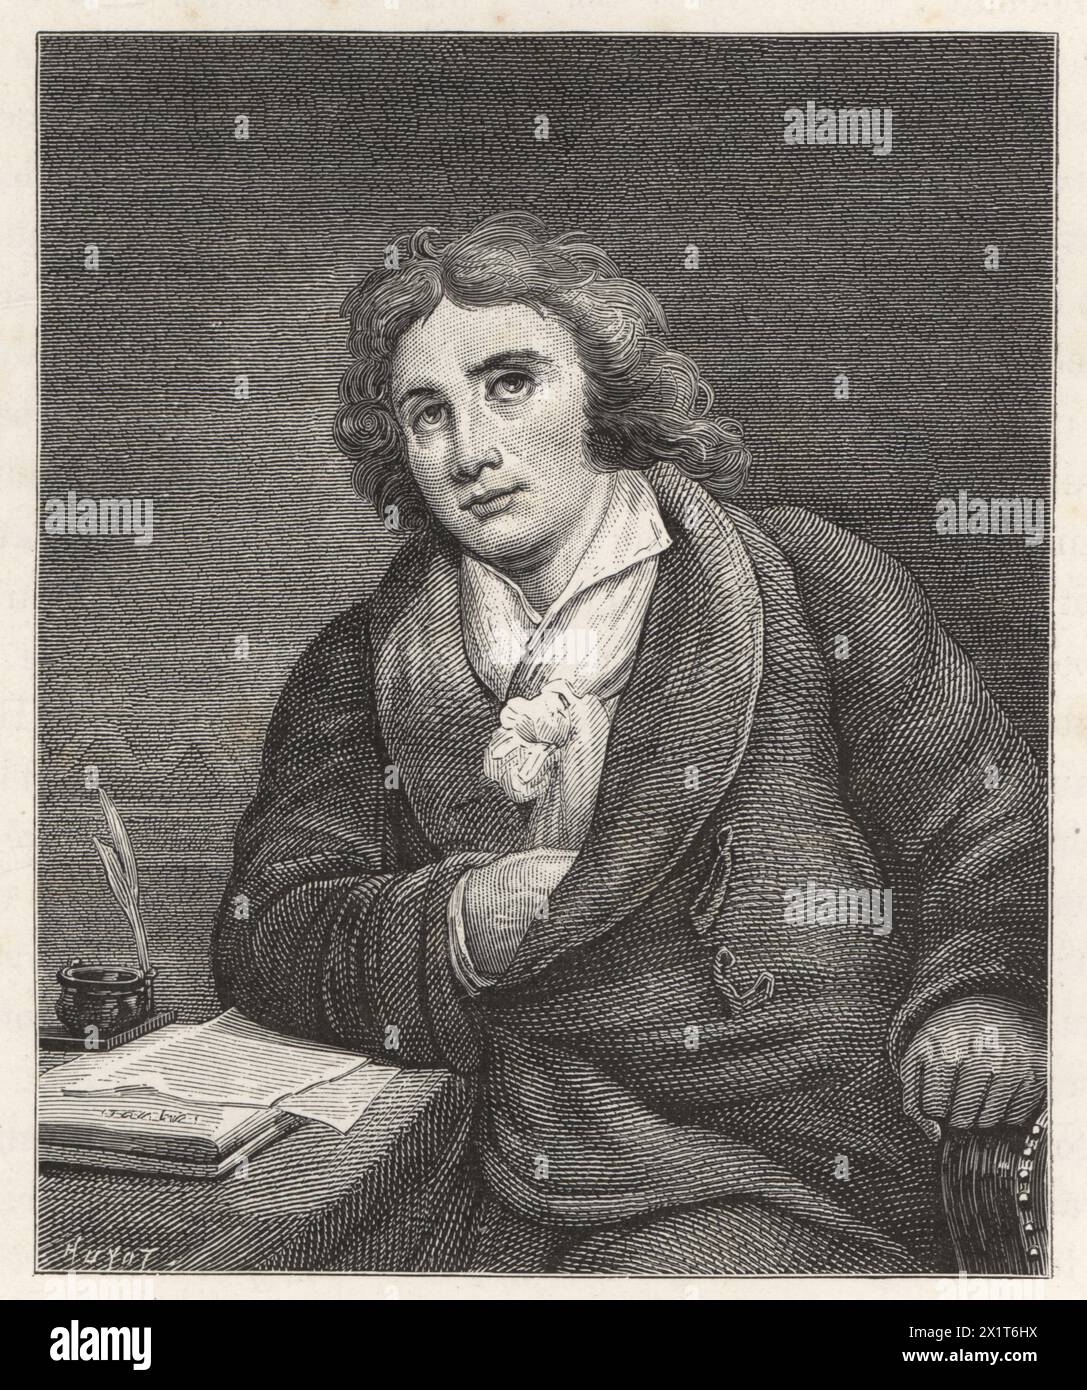 Marie-Joseph Blaise de Chénier, French poet, dramatist and politician, 1764-1811. With quill pen, ink well and manuscript. Woodcut by Huyot after a portrait by Horace Vernet from Paul Lacroix's Directoire, Consulat et Empire, (Directory, Consulate and Empire), Paris, 1884. Stock Photo